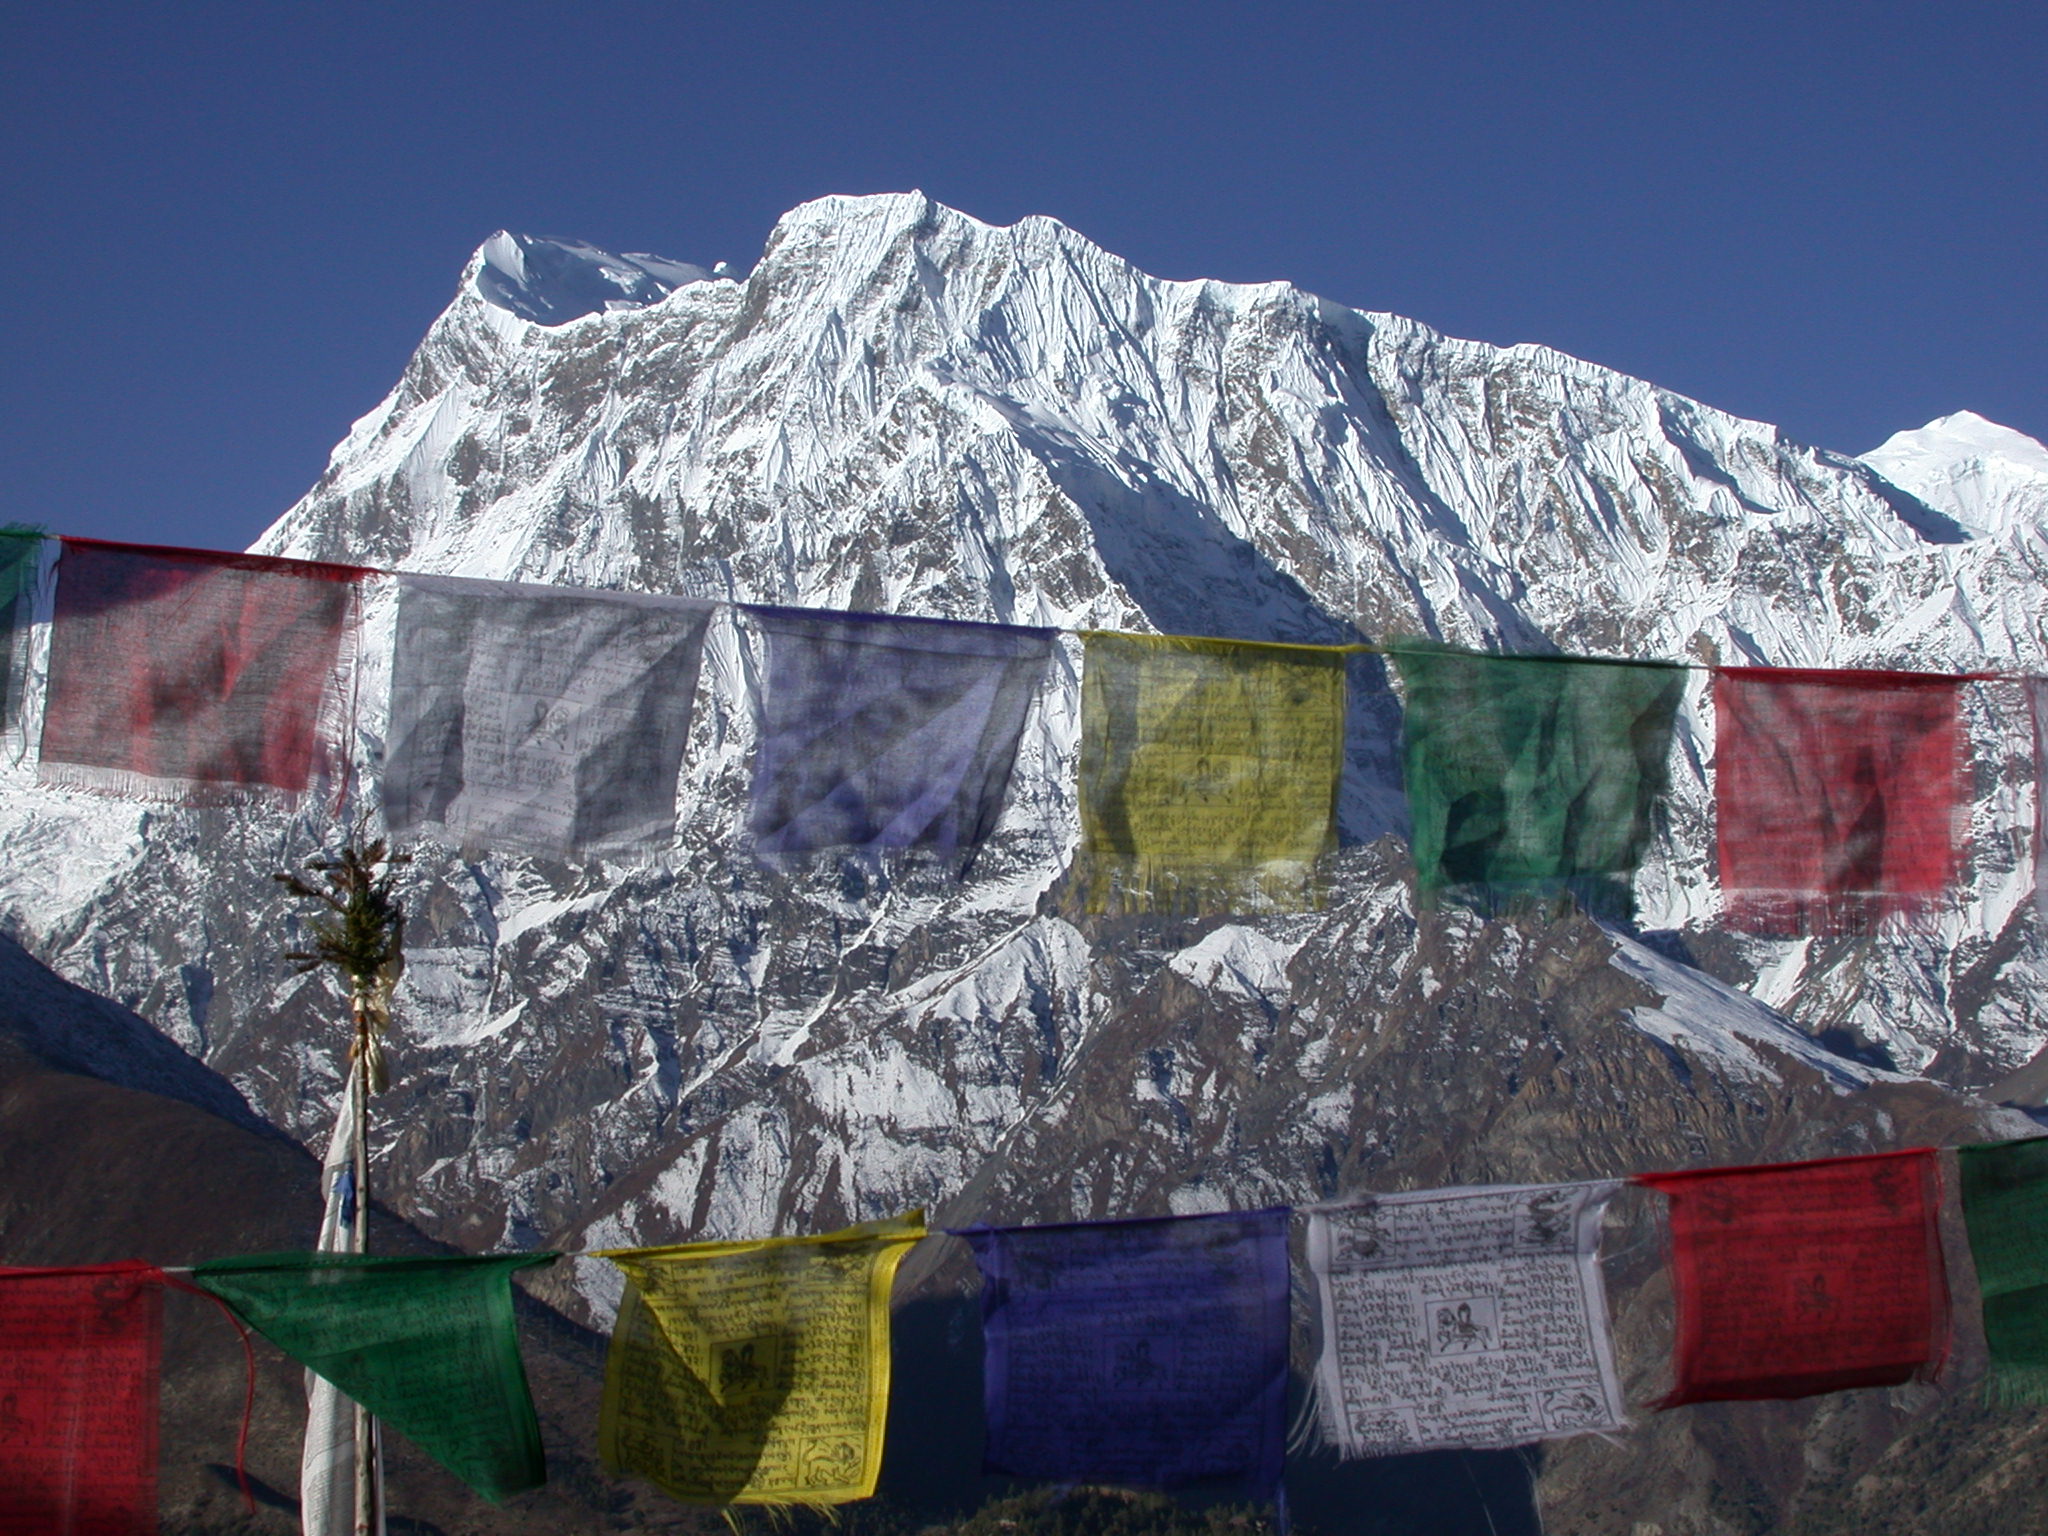 North face of the central Himalaya, where the rainshadow meets the snowline